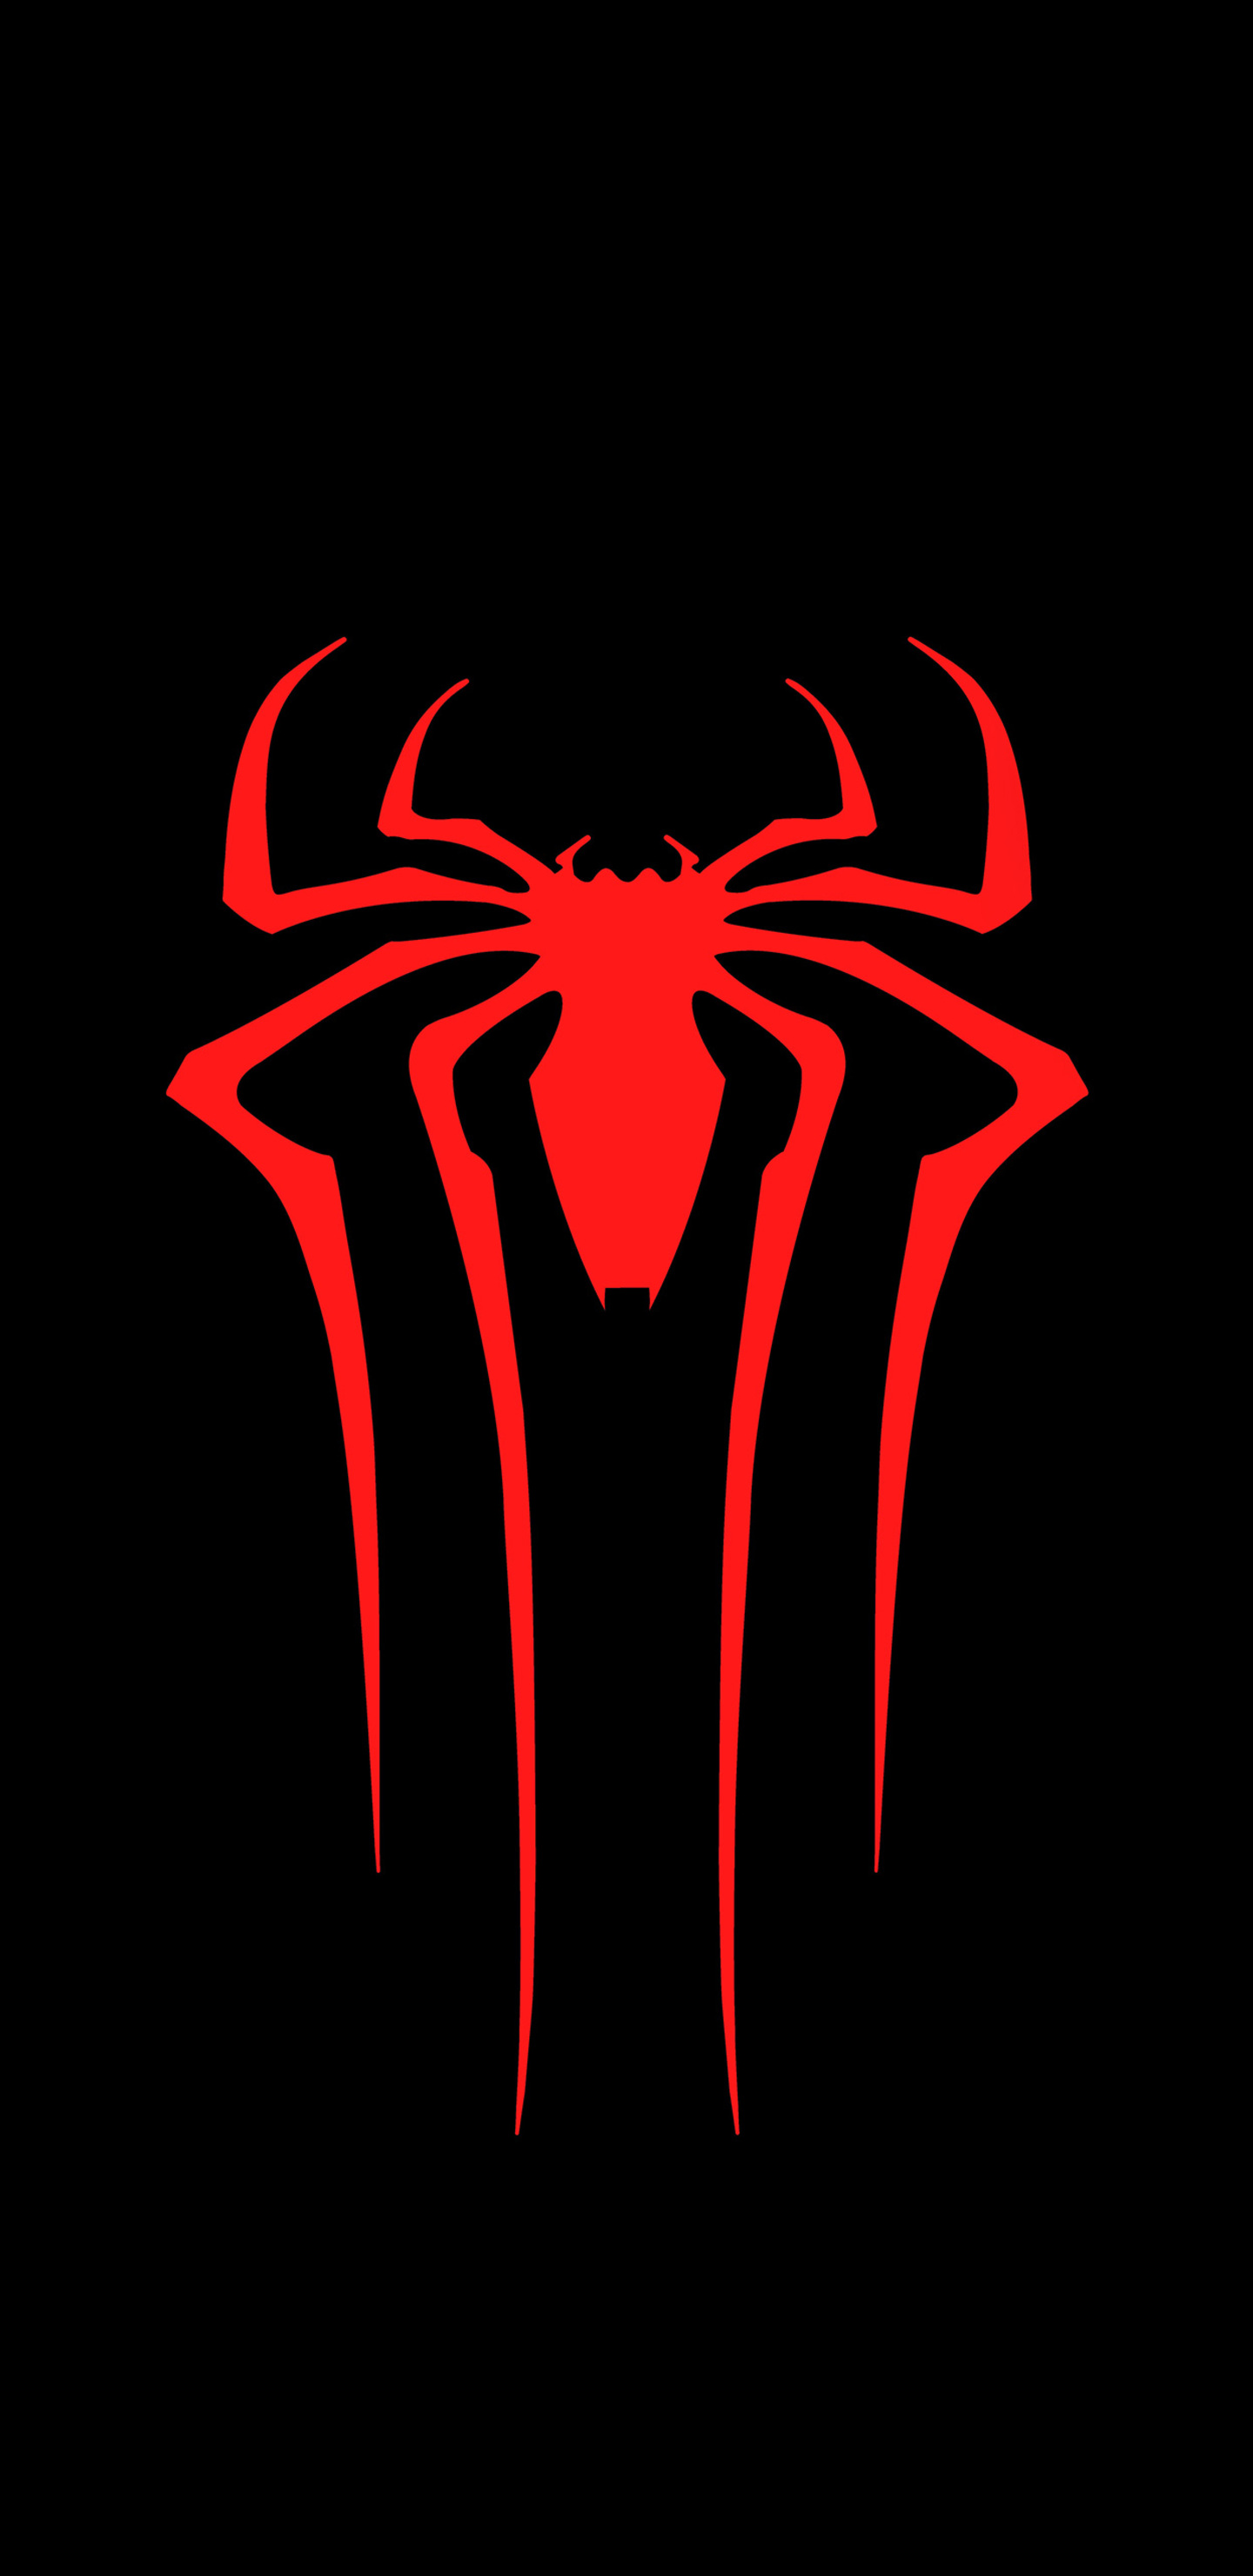 1440x2960 Spiderman Logo 8k Samsung Galaxy Note 9,8, S9,S8,S8+ QHD HD 4k  Wallpapers, Images, Backgrounds, Photos and Pictures